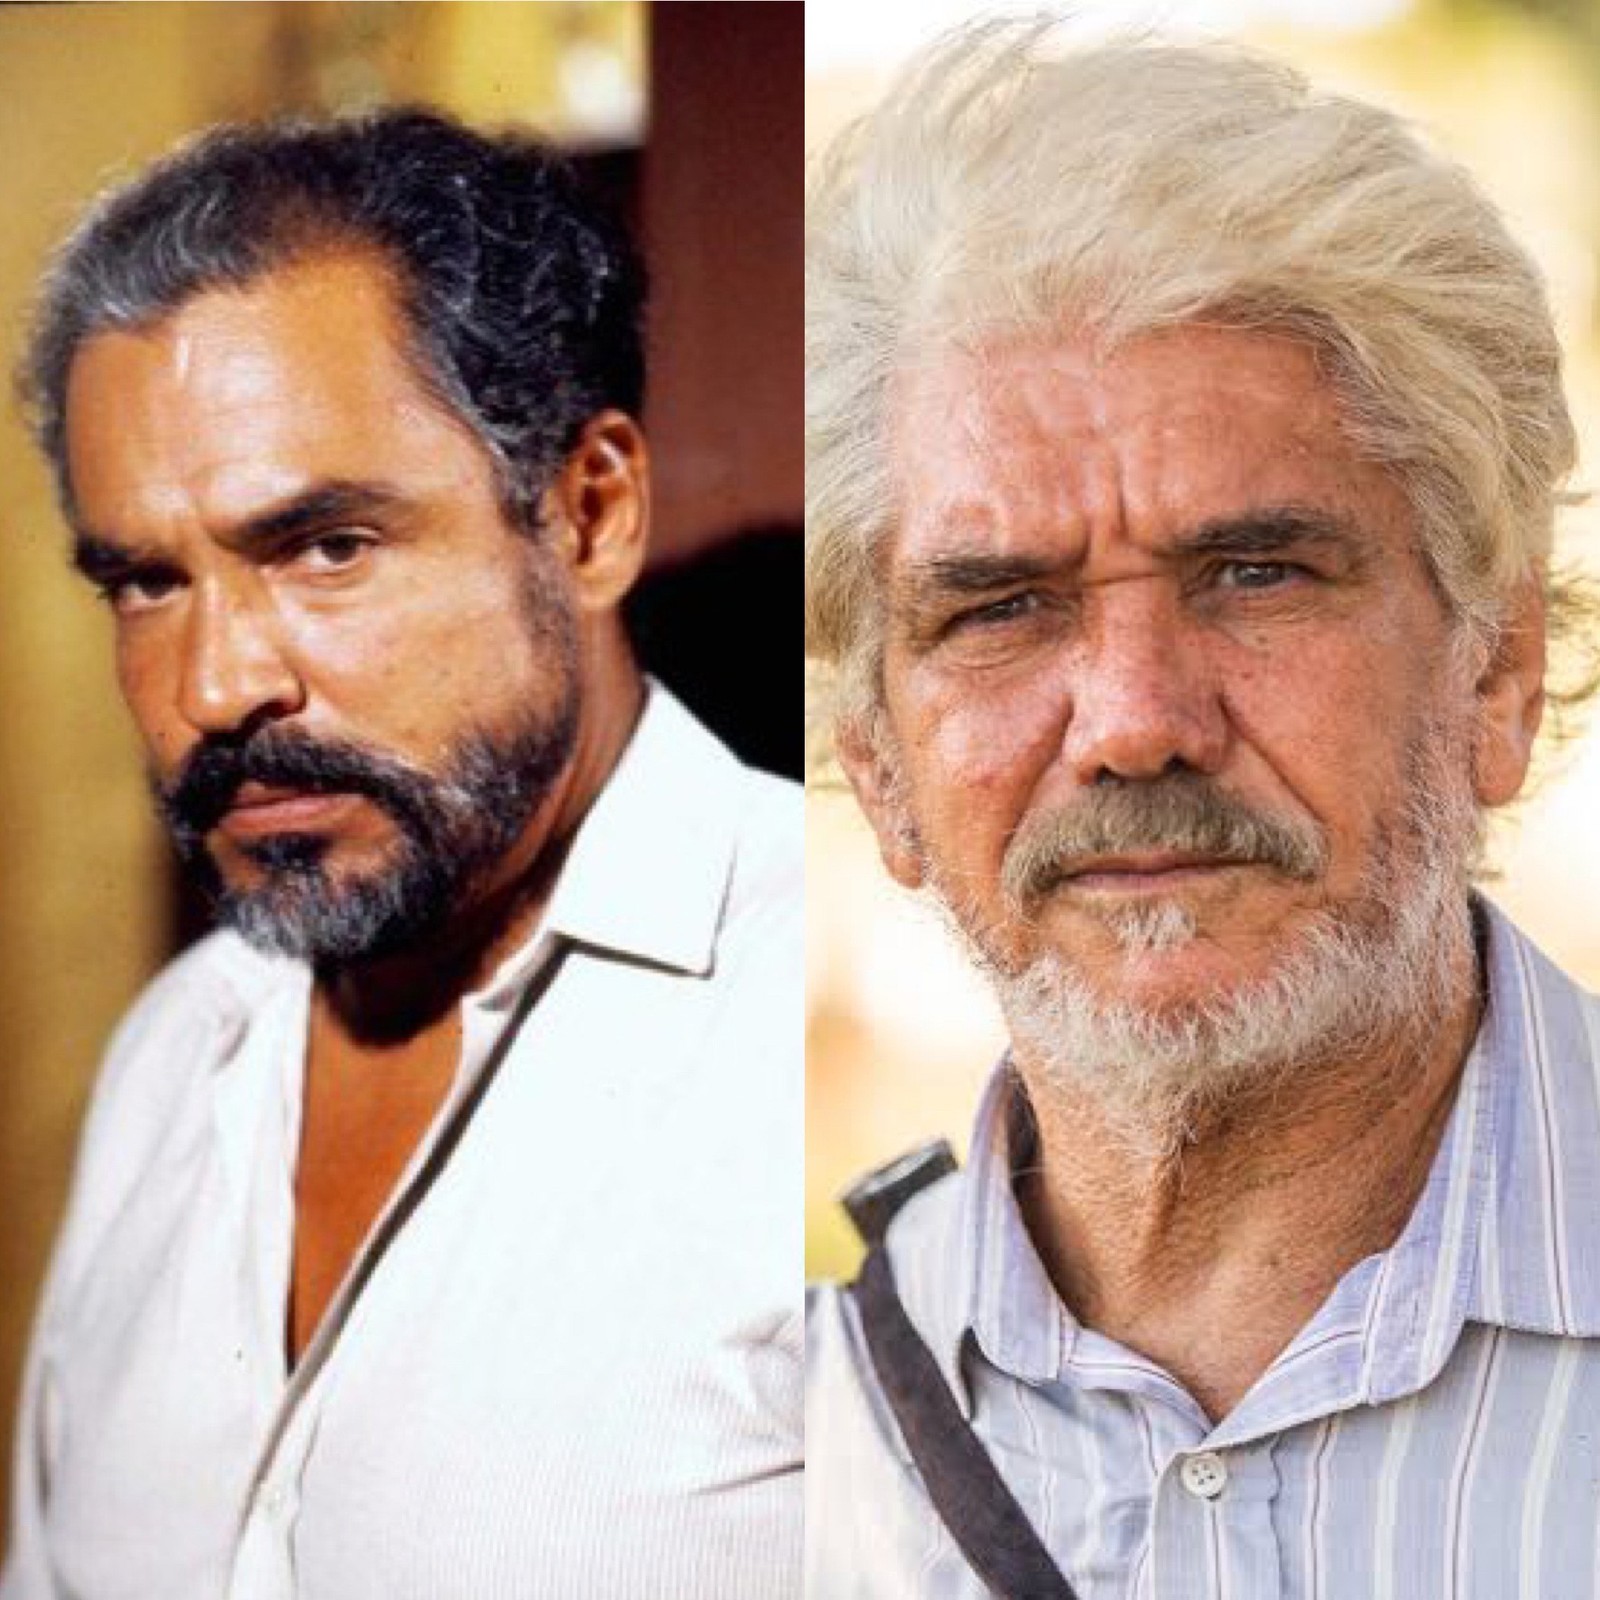 José Inocêncio's right-hand man, Deocleciano was played by Roberto Bonfim in 1993. Now, he will be played by Jackson Antunes 